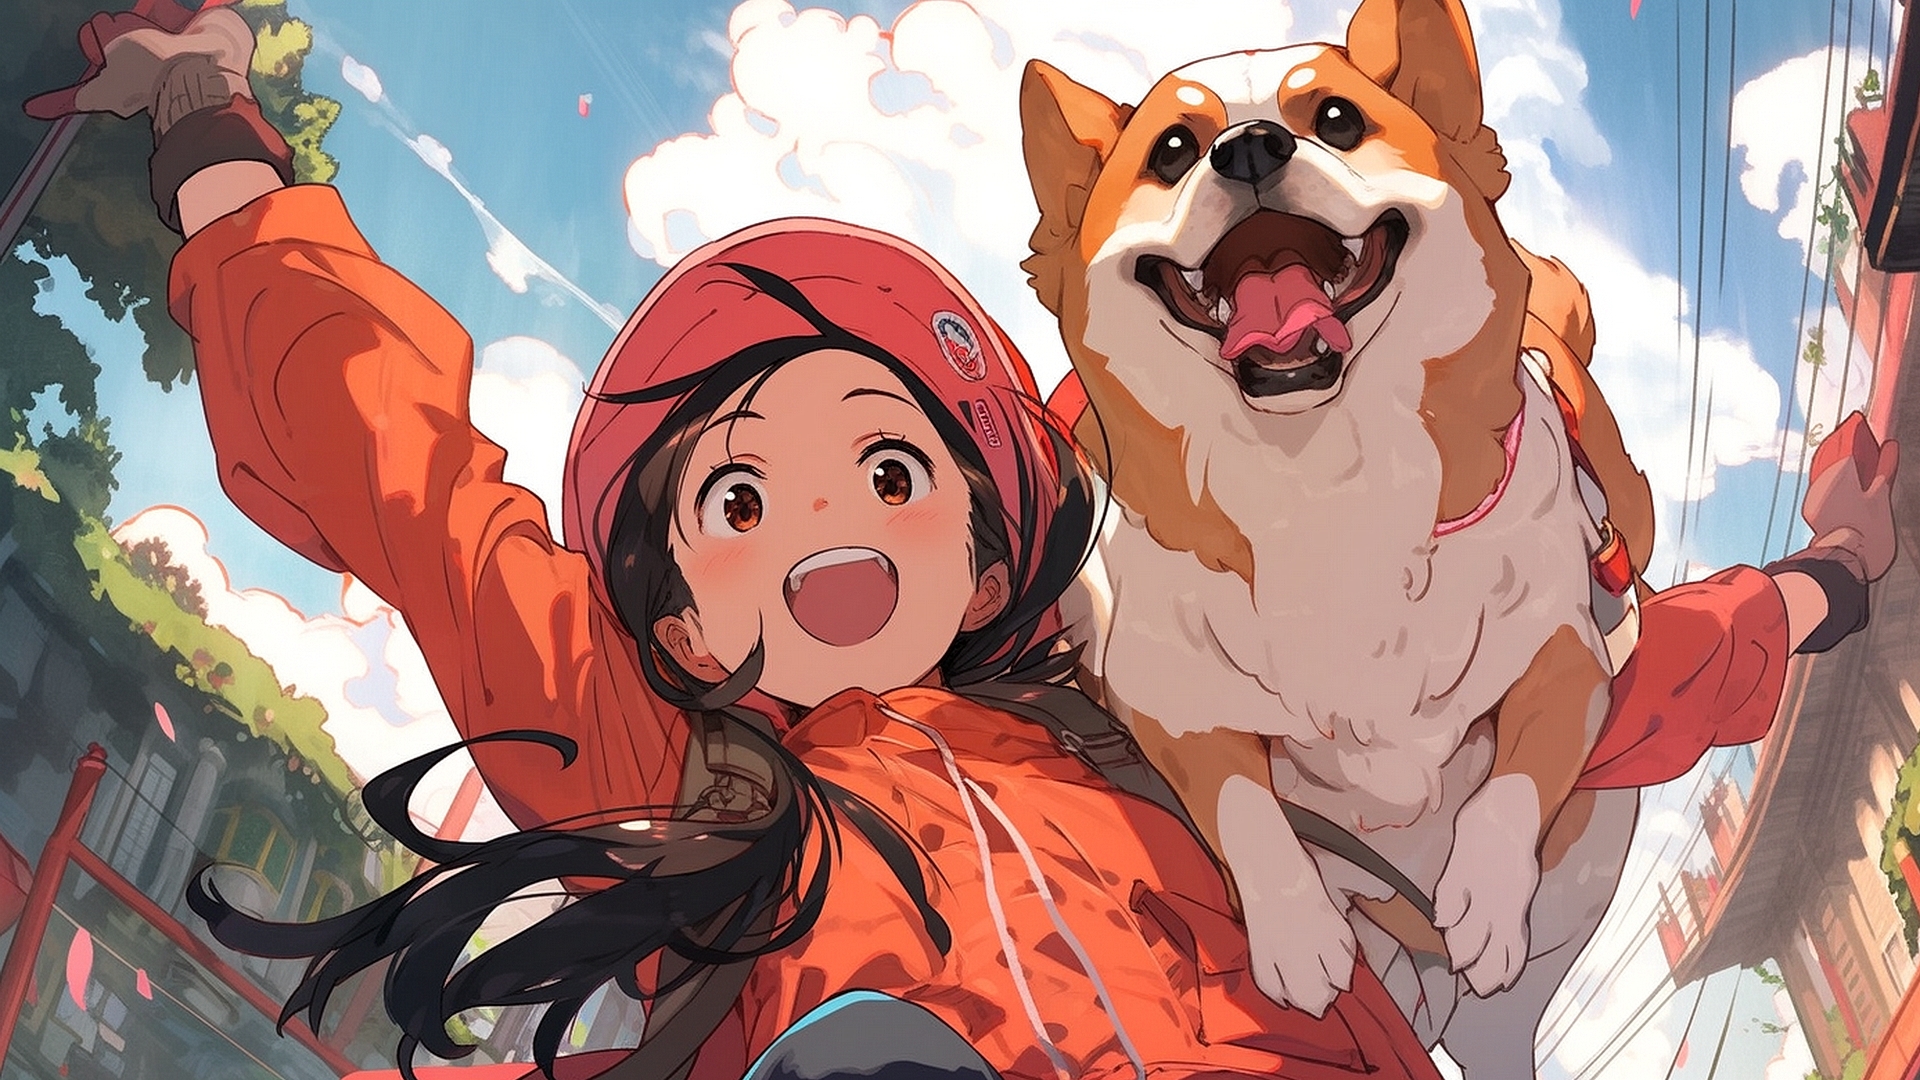 Free photo A drawing of a joyful girl and a dog